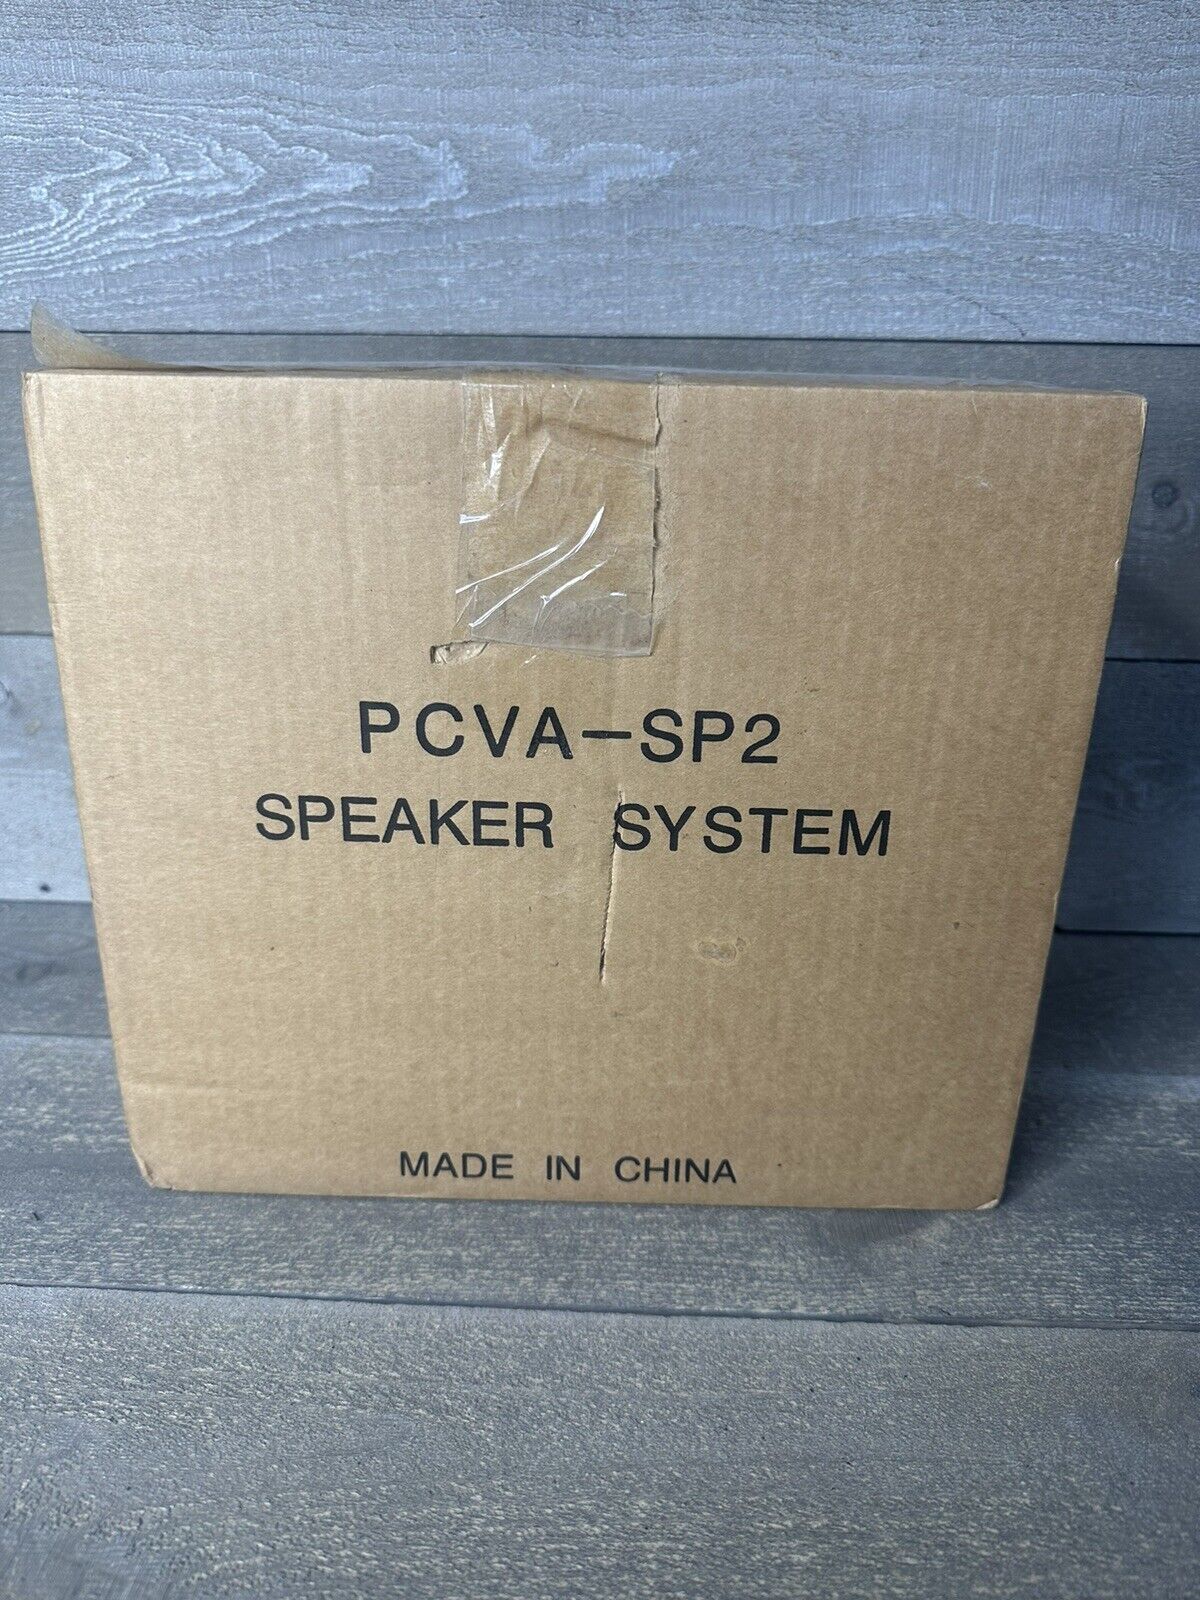 Sony Vaio Computer PC Speaker System PCVA-SP2 Includes 12V AC Adapter New